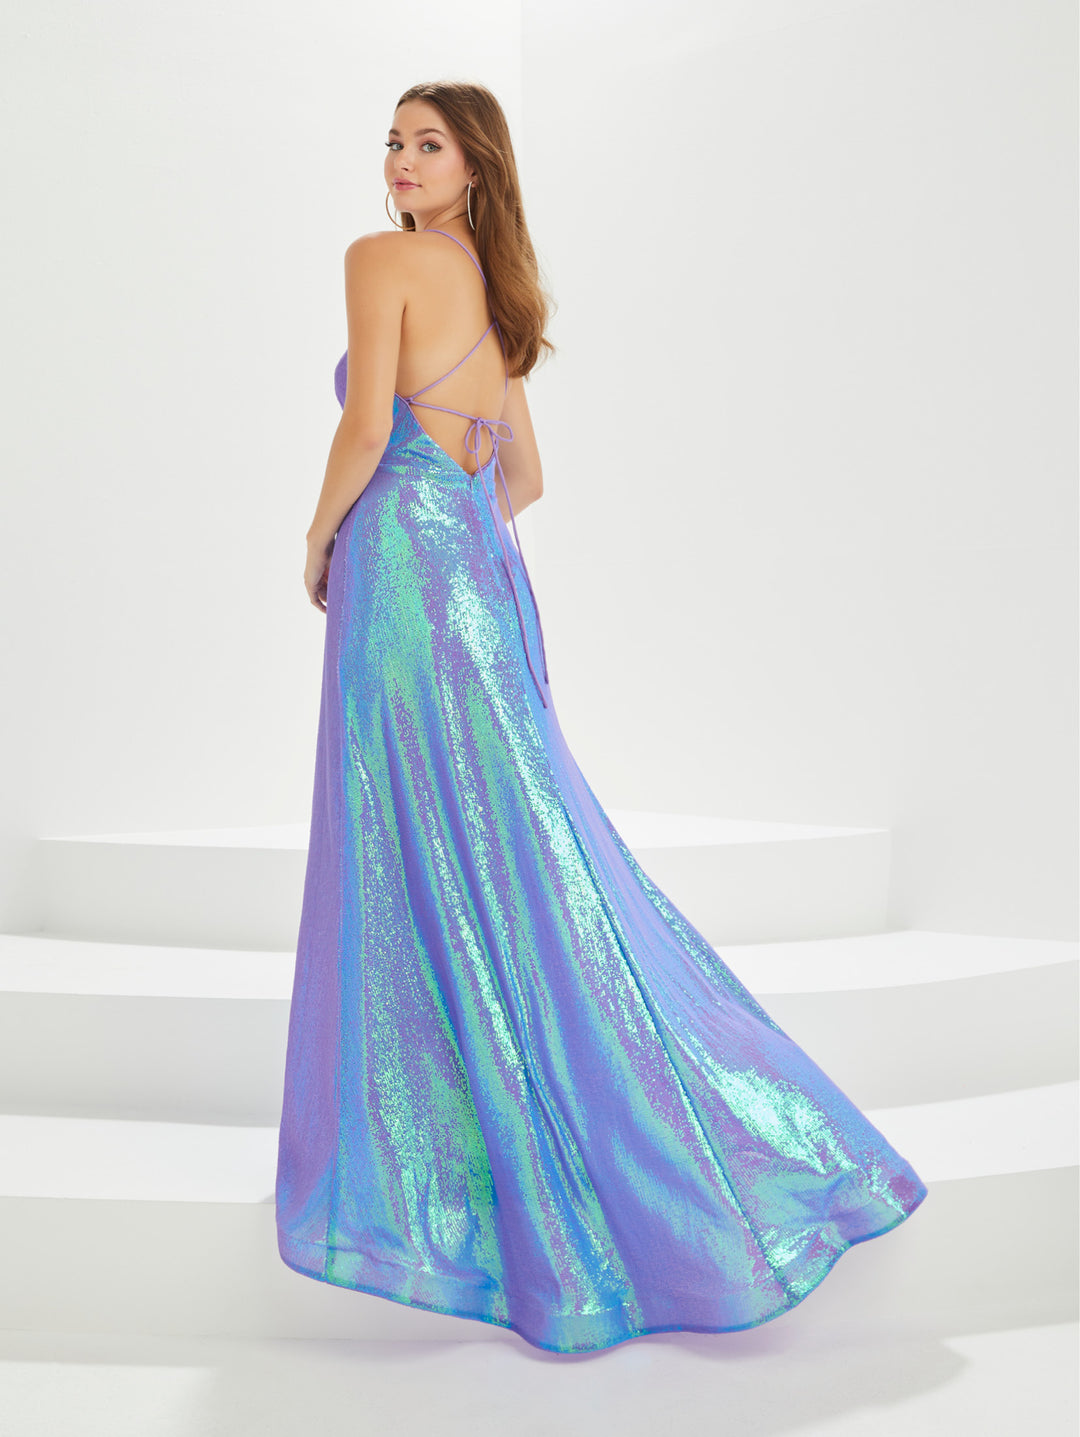 Iridescent Sequin Sleeveless Gown by Tiffany Designs 16030